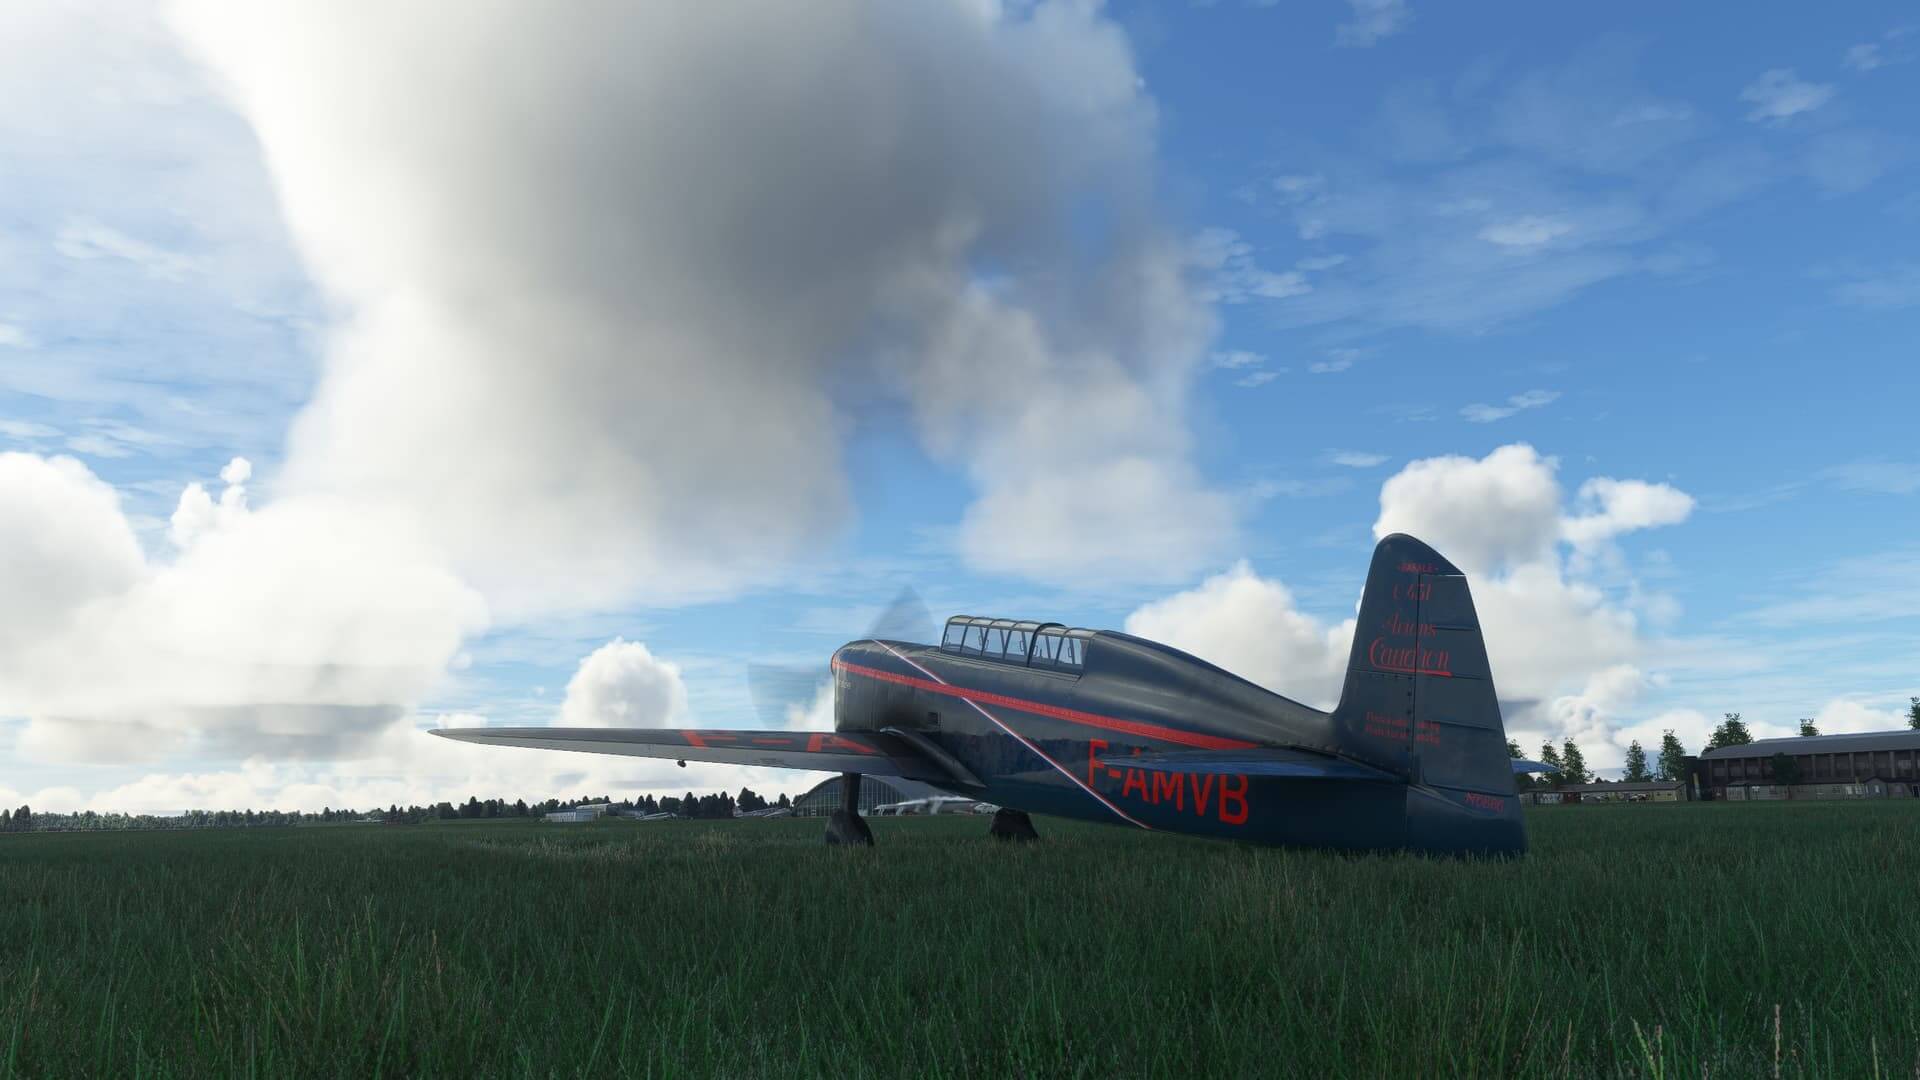 A grey and red plane sits parked in a sunny field.